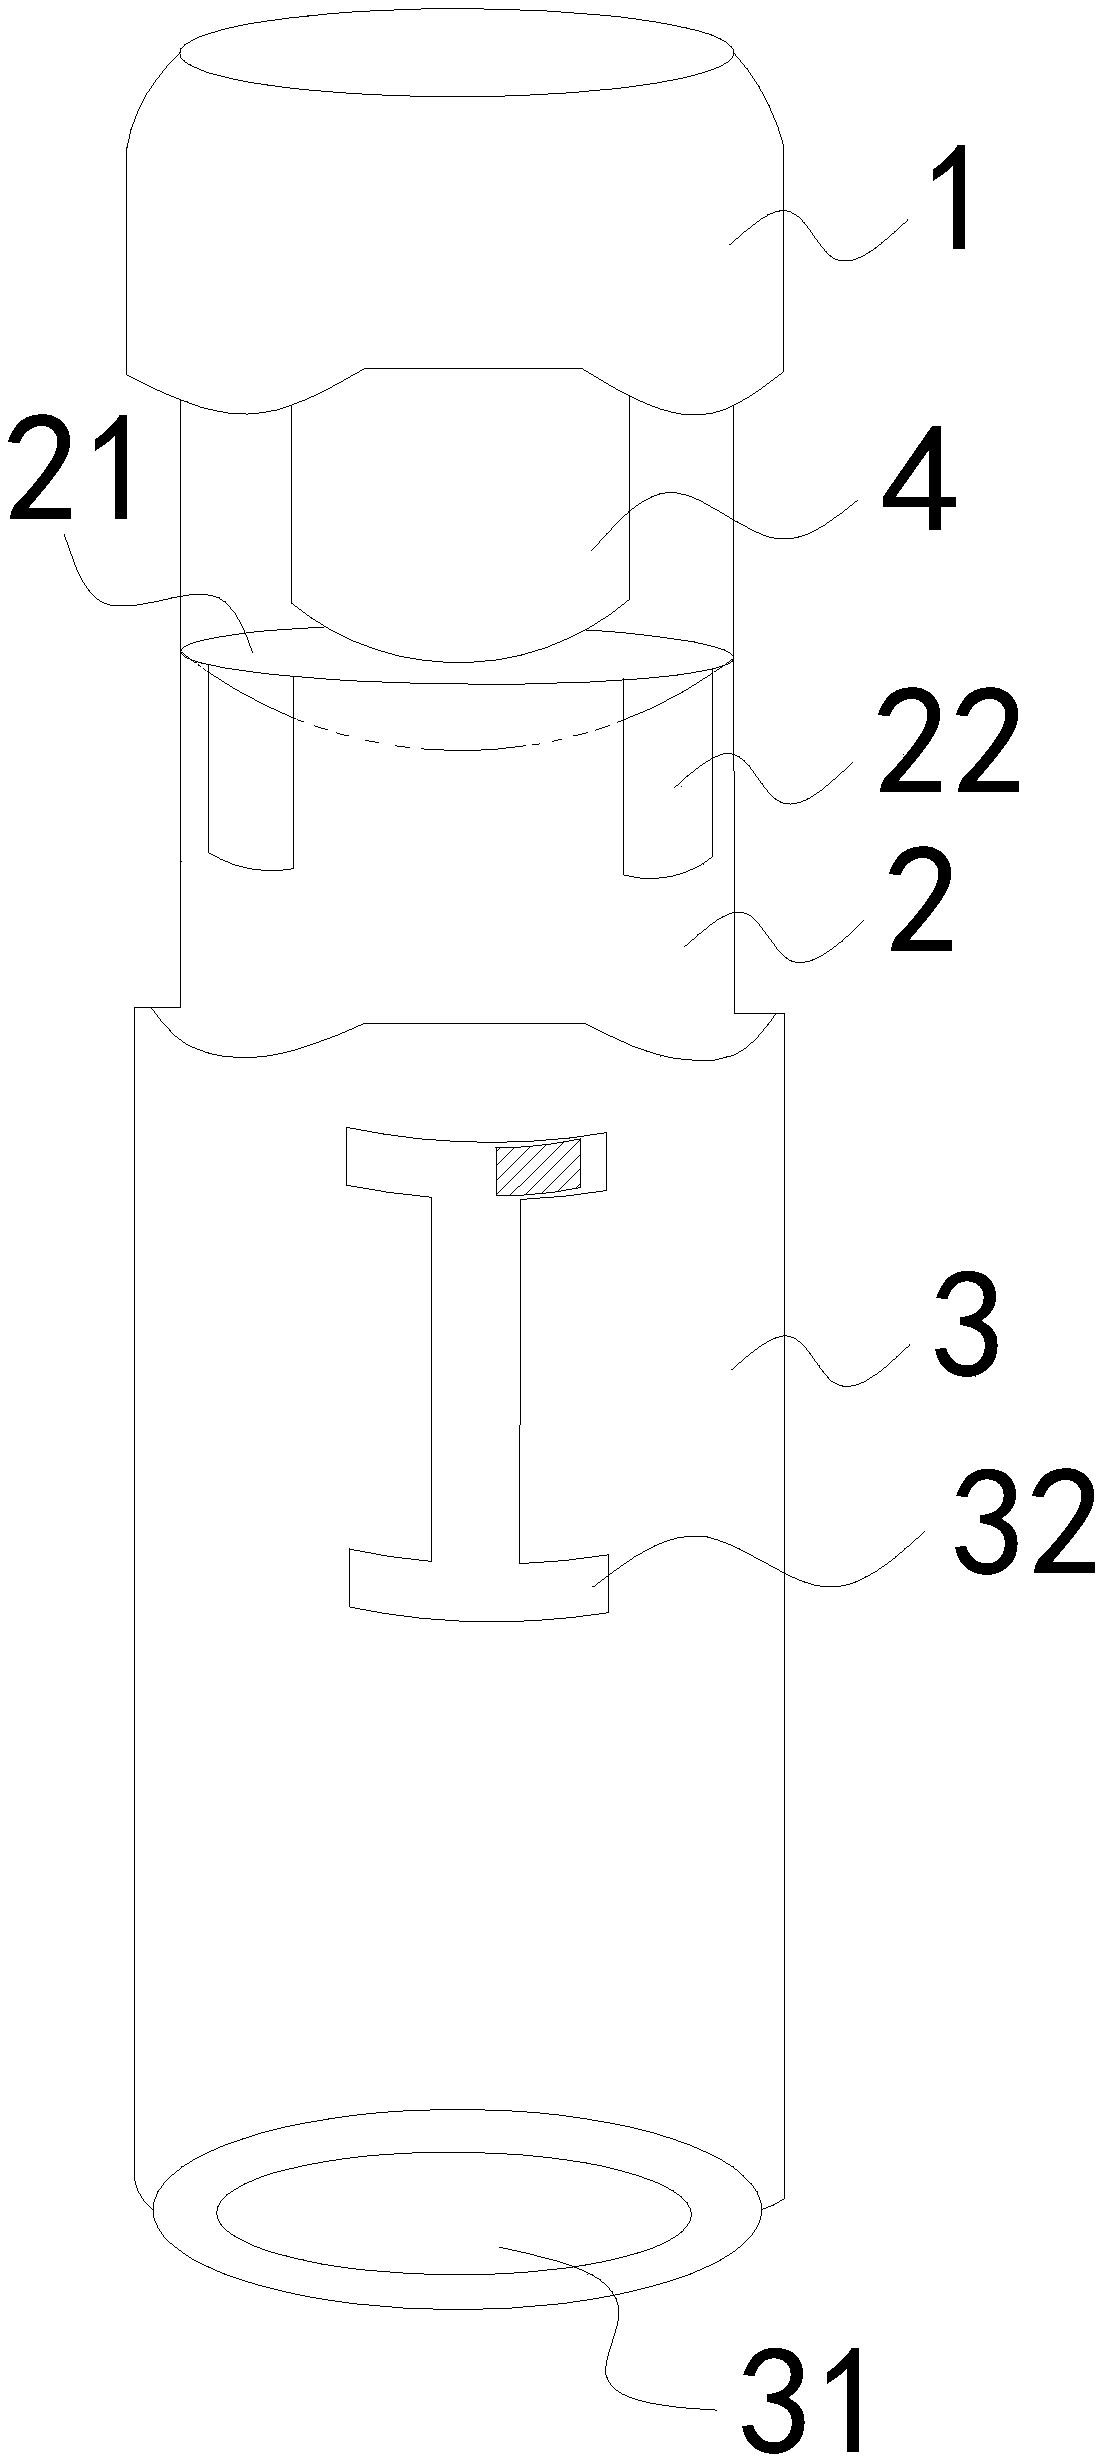 Containing device of air freshener